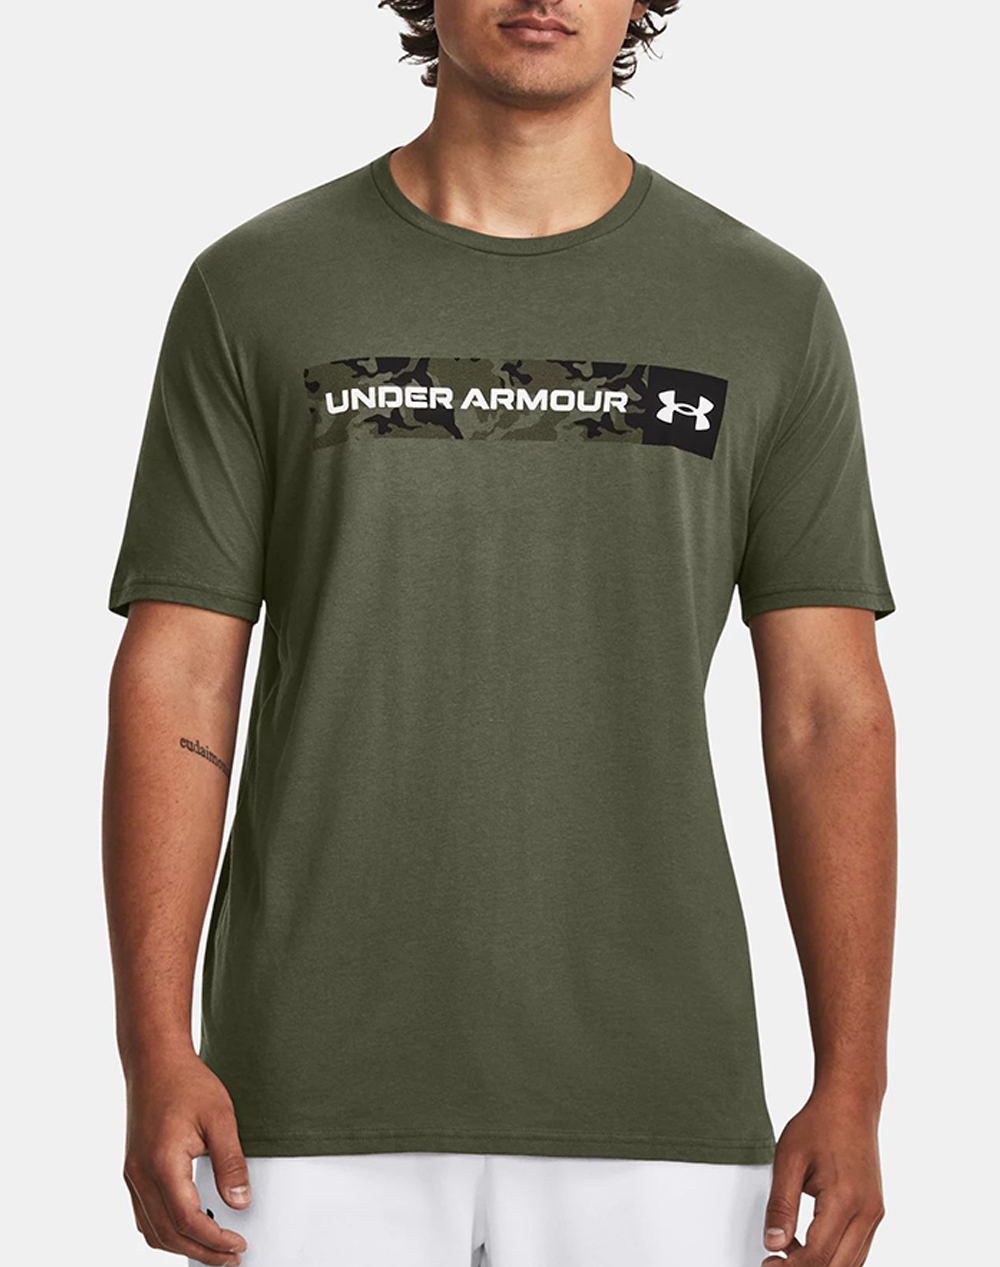 UNDER ARMOUR UA CAMO CHEST STRIPE SS 1376830-390 Olive 3820AUNDE3400035_XR27090